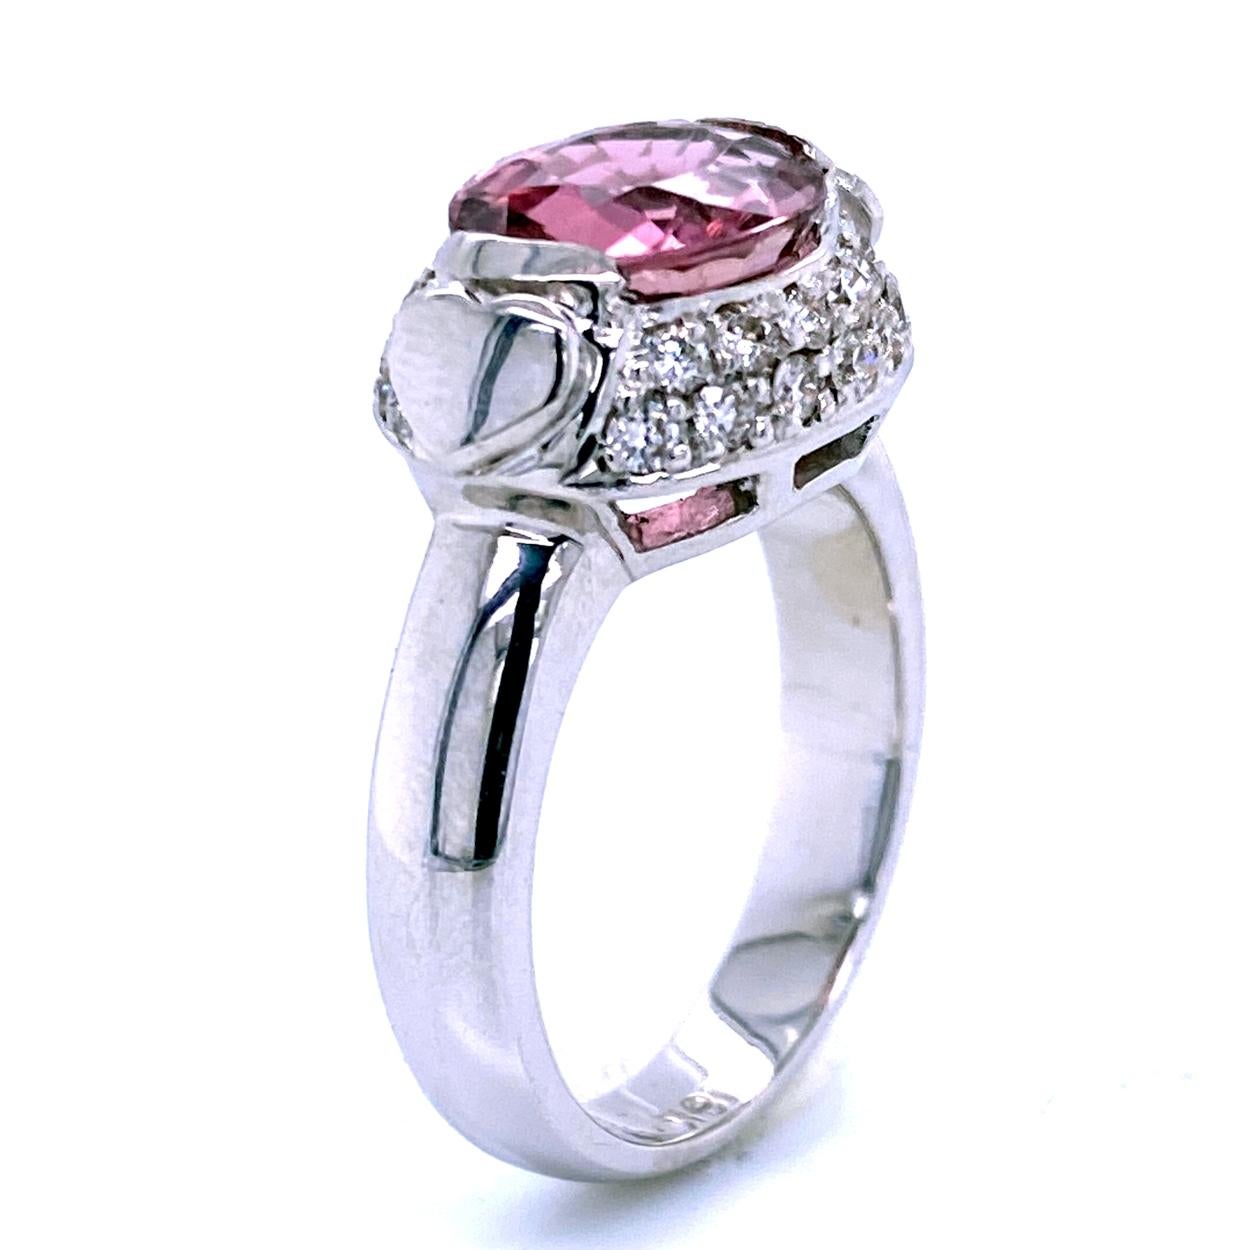 A beautiful color 2.65 Ct Oval shaped Pink Tourmaline Bezel set in the center of an 18K Pave set Diamond Engagement Ring. 

Details:
Center Stone: 2.95 carat Oval Pink Tourmaline - 10.5x8.5 mm
Side Stone Diamonds: 
26 pieces 1.5 mm VS2-SI1 Clarity,